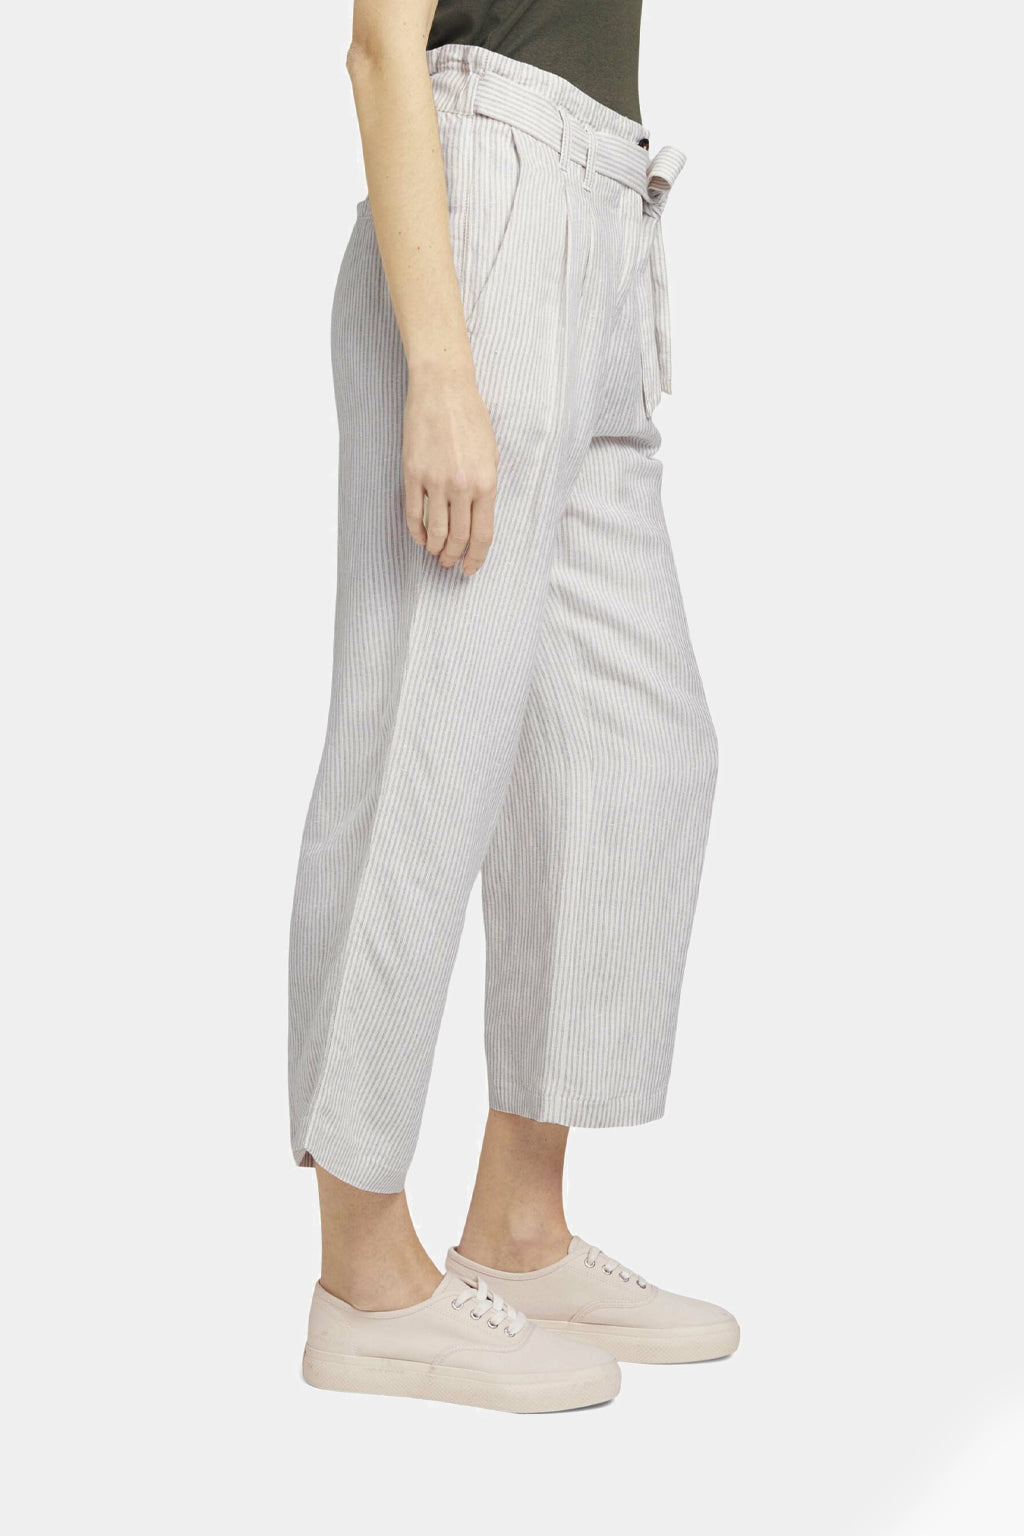 Tom Tailor - Pleated Culotte Trousers With Linen